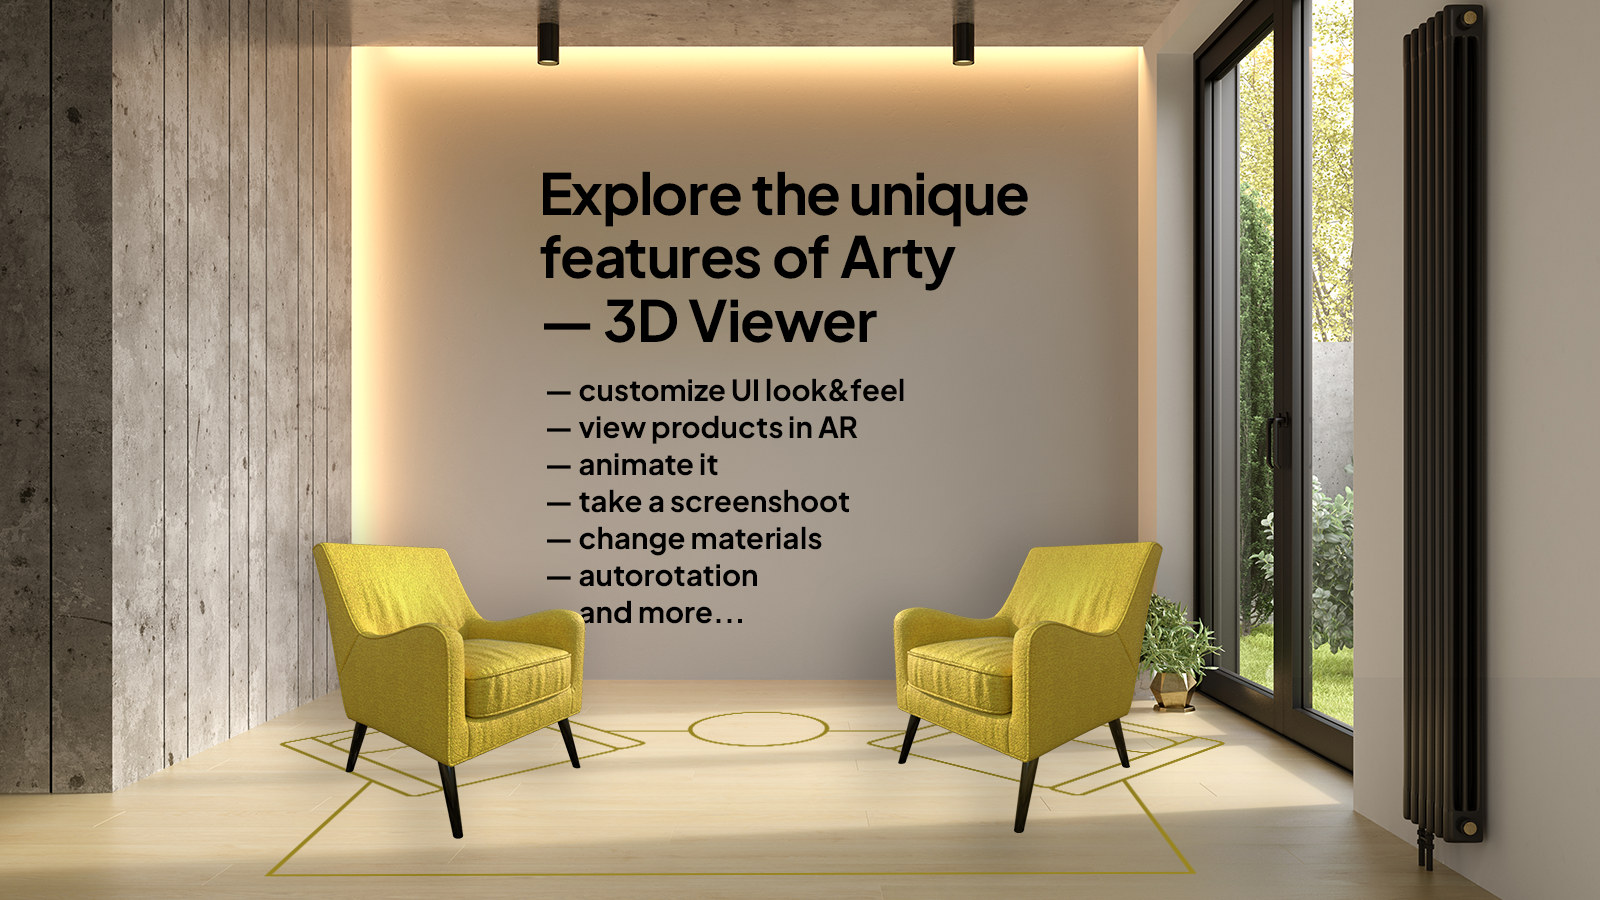 Explore the features of Arty 3D Model Viewer